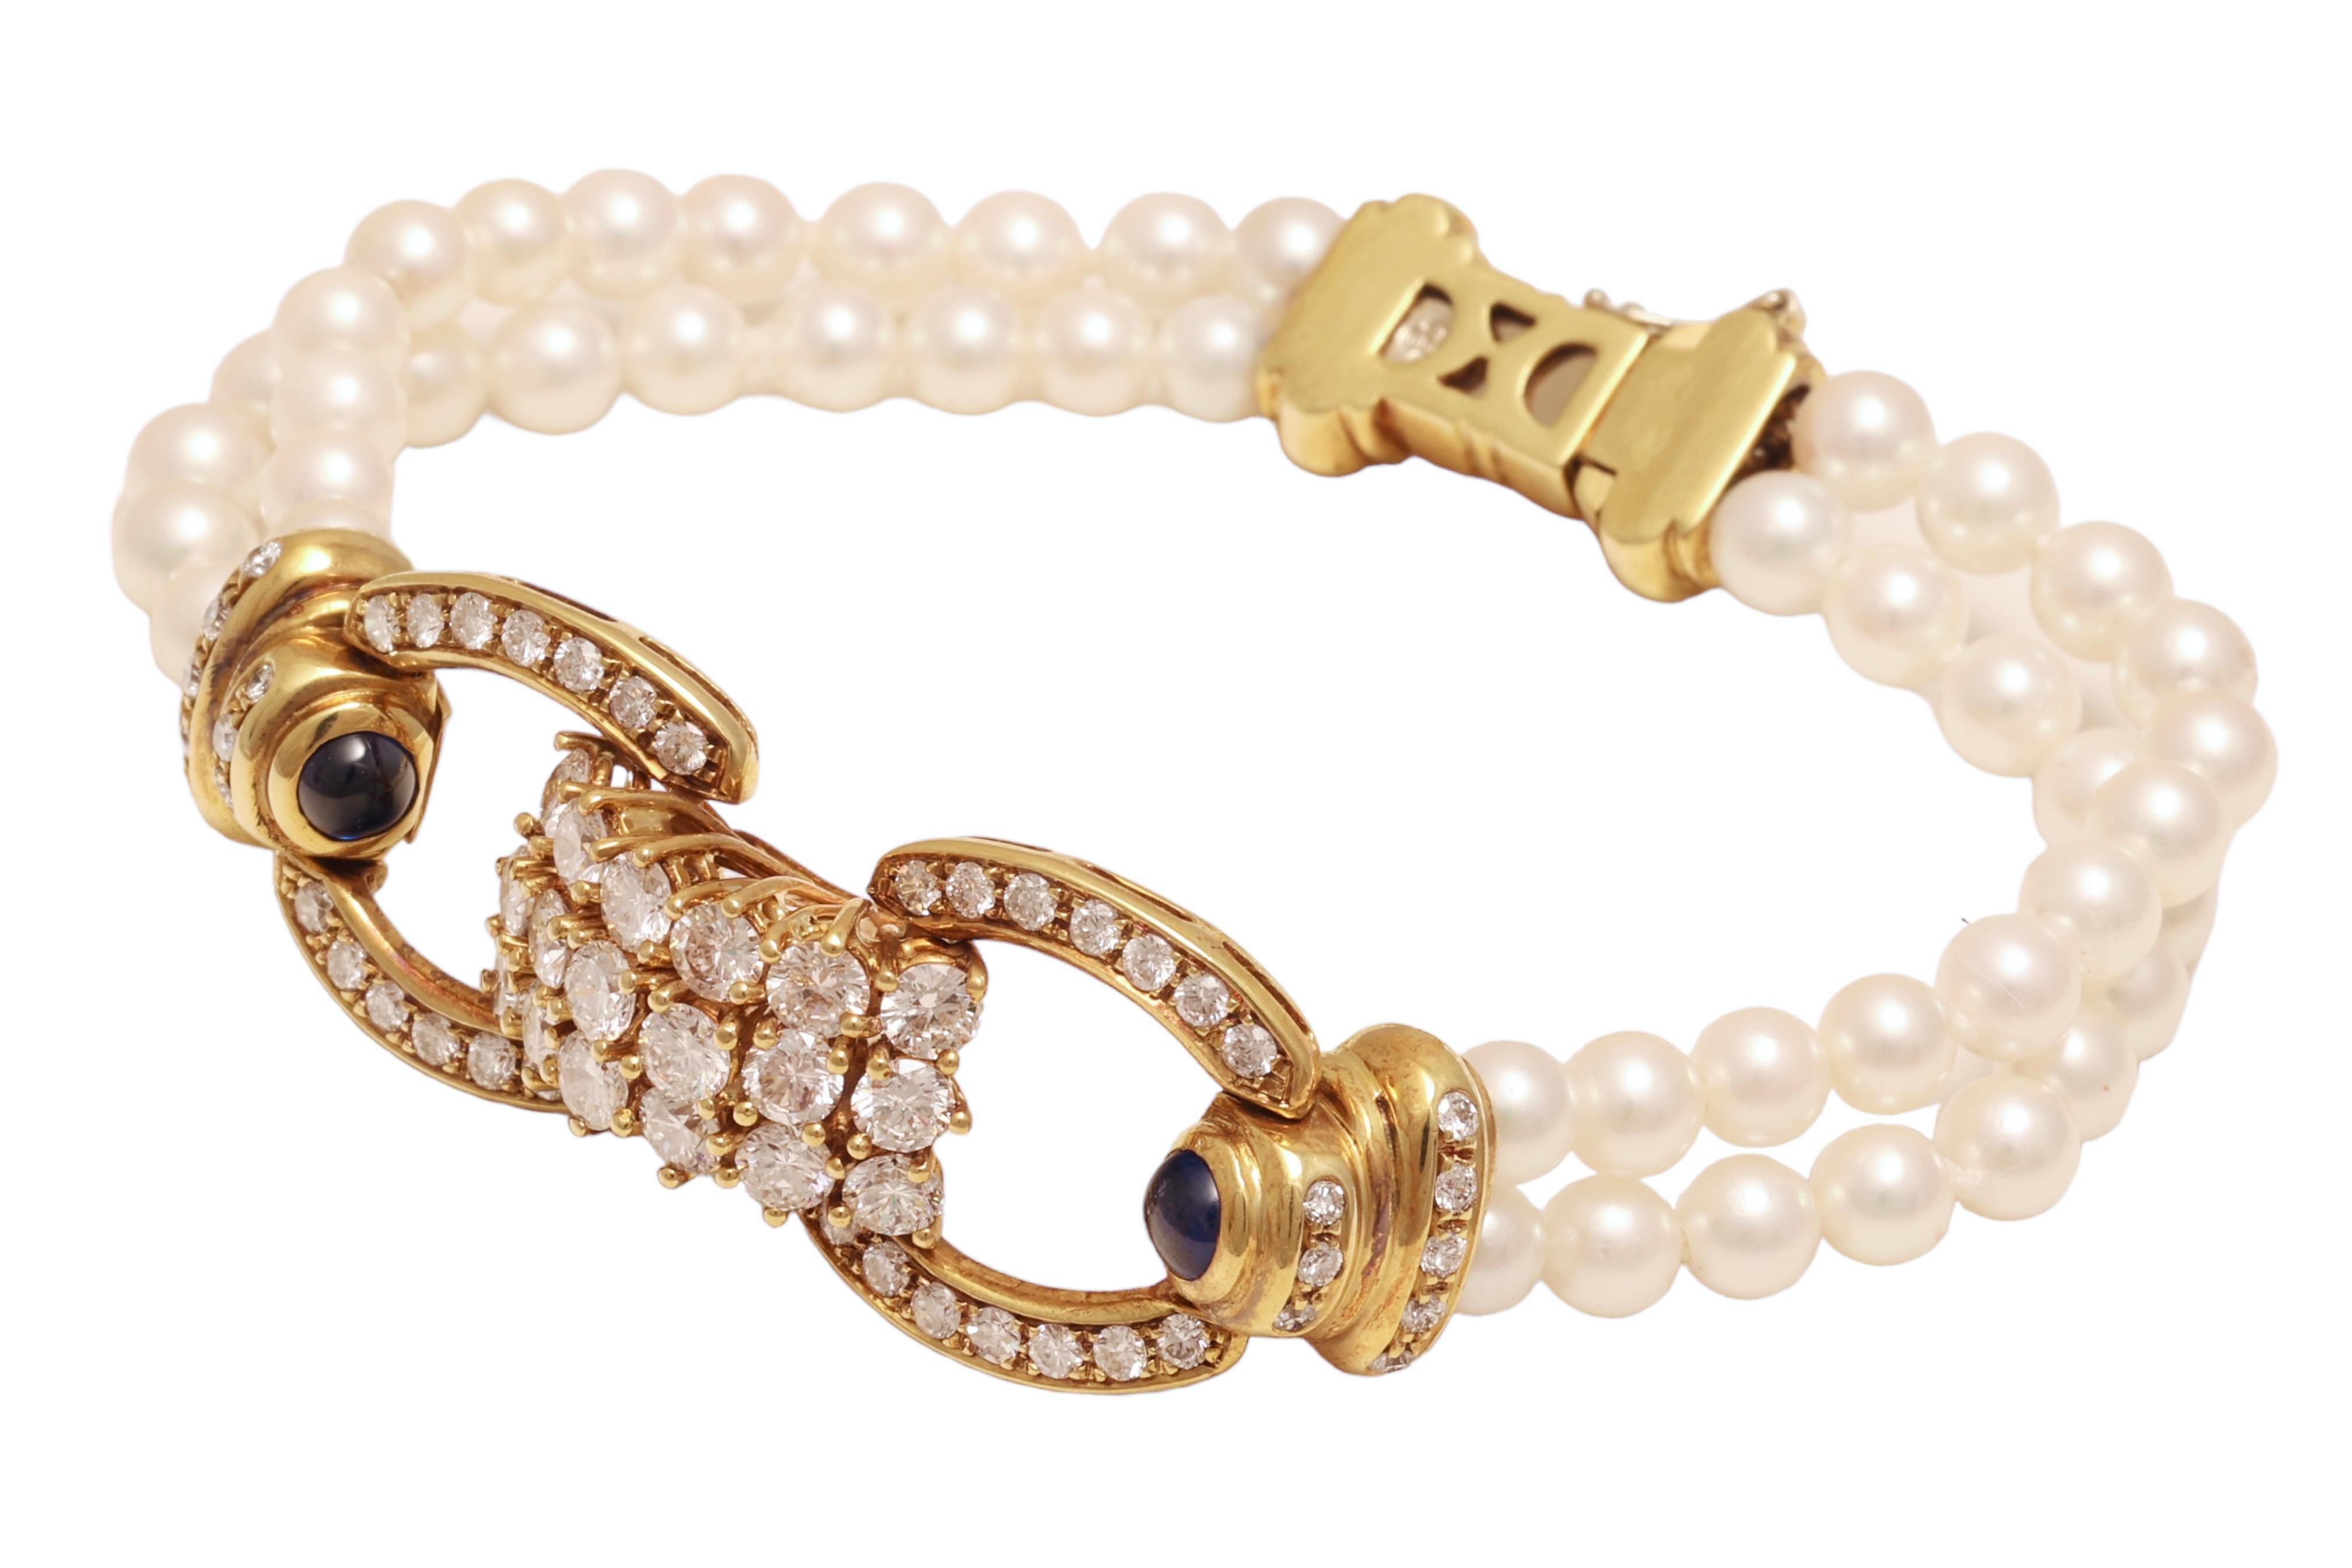 Elegant Pearl Bracelet in 18 kt. Yellow Gold Set With 3.58 ct. Diamonds, Pearls and Sapphires

Diamonds: Brilliant cut diamonds together approx. 3.58 ct.

Pearls: 48 pearls, diameter 4.5 mm each pearl

Sapphires: 2 blue cabochon sapphires